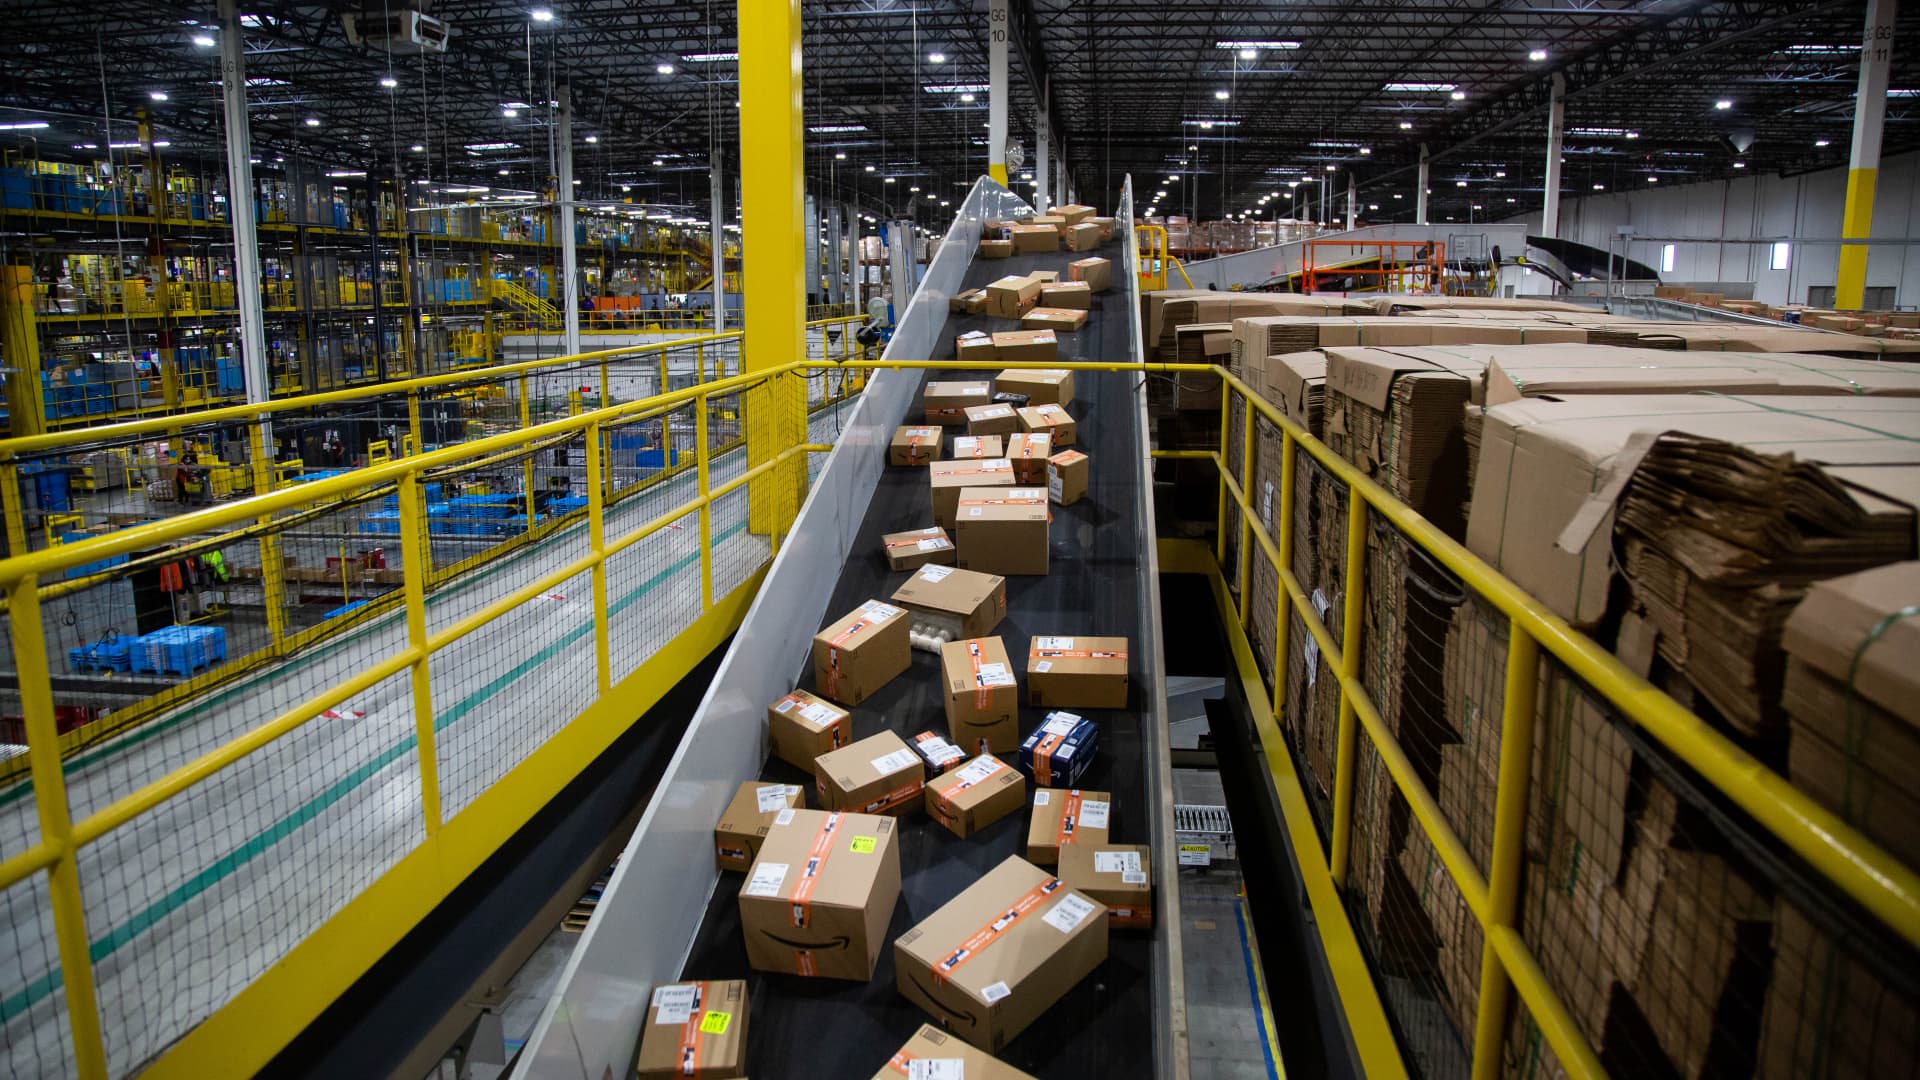 Amazon closes some warehouses in Florida as Hurricane Ian approaches